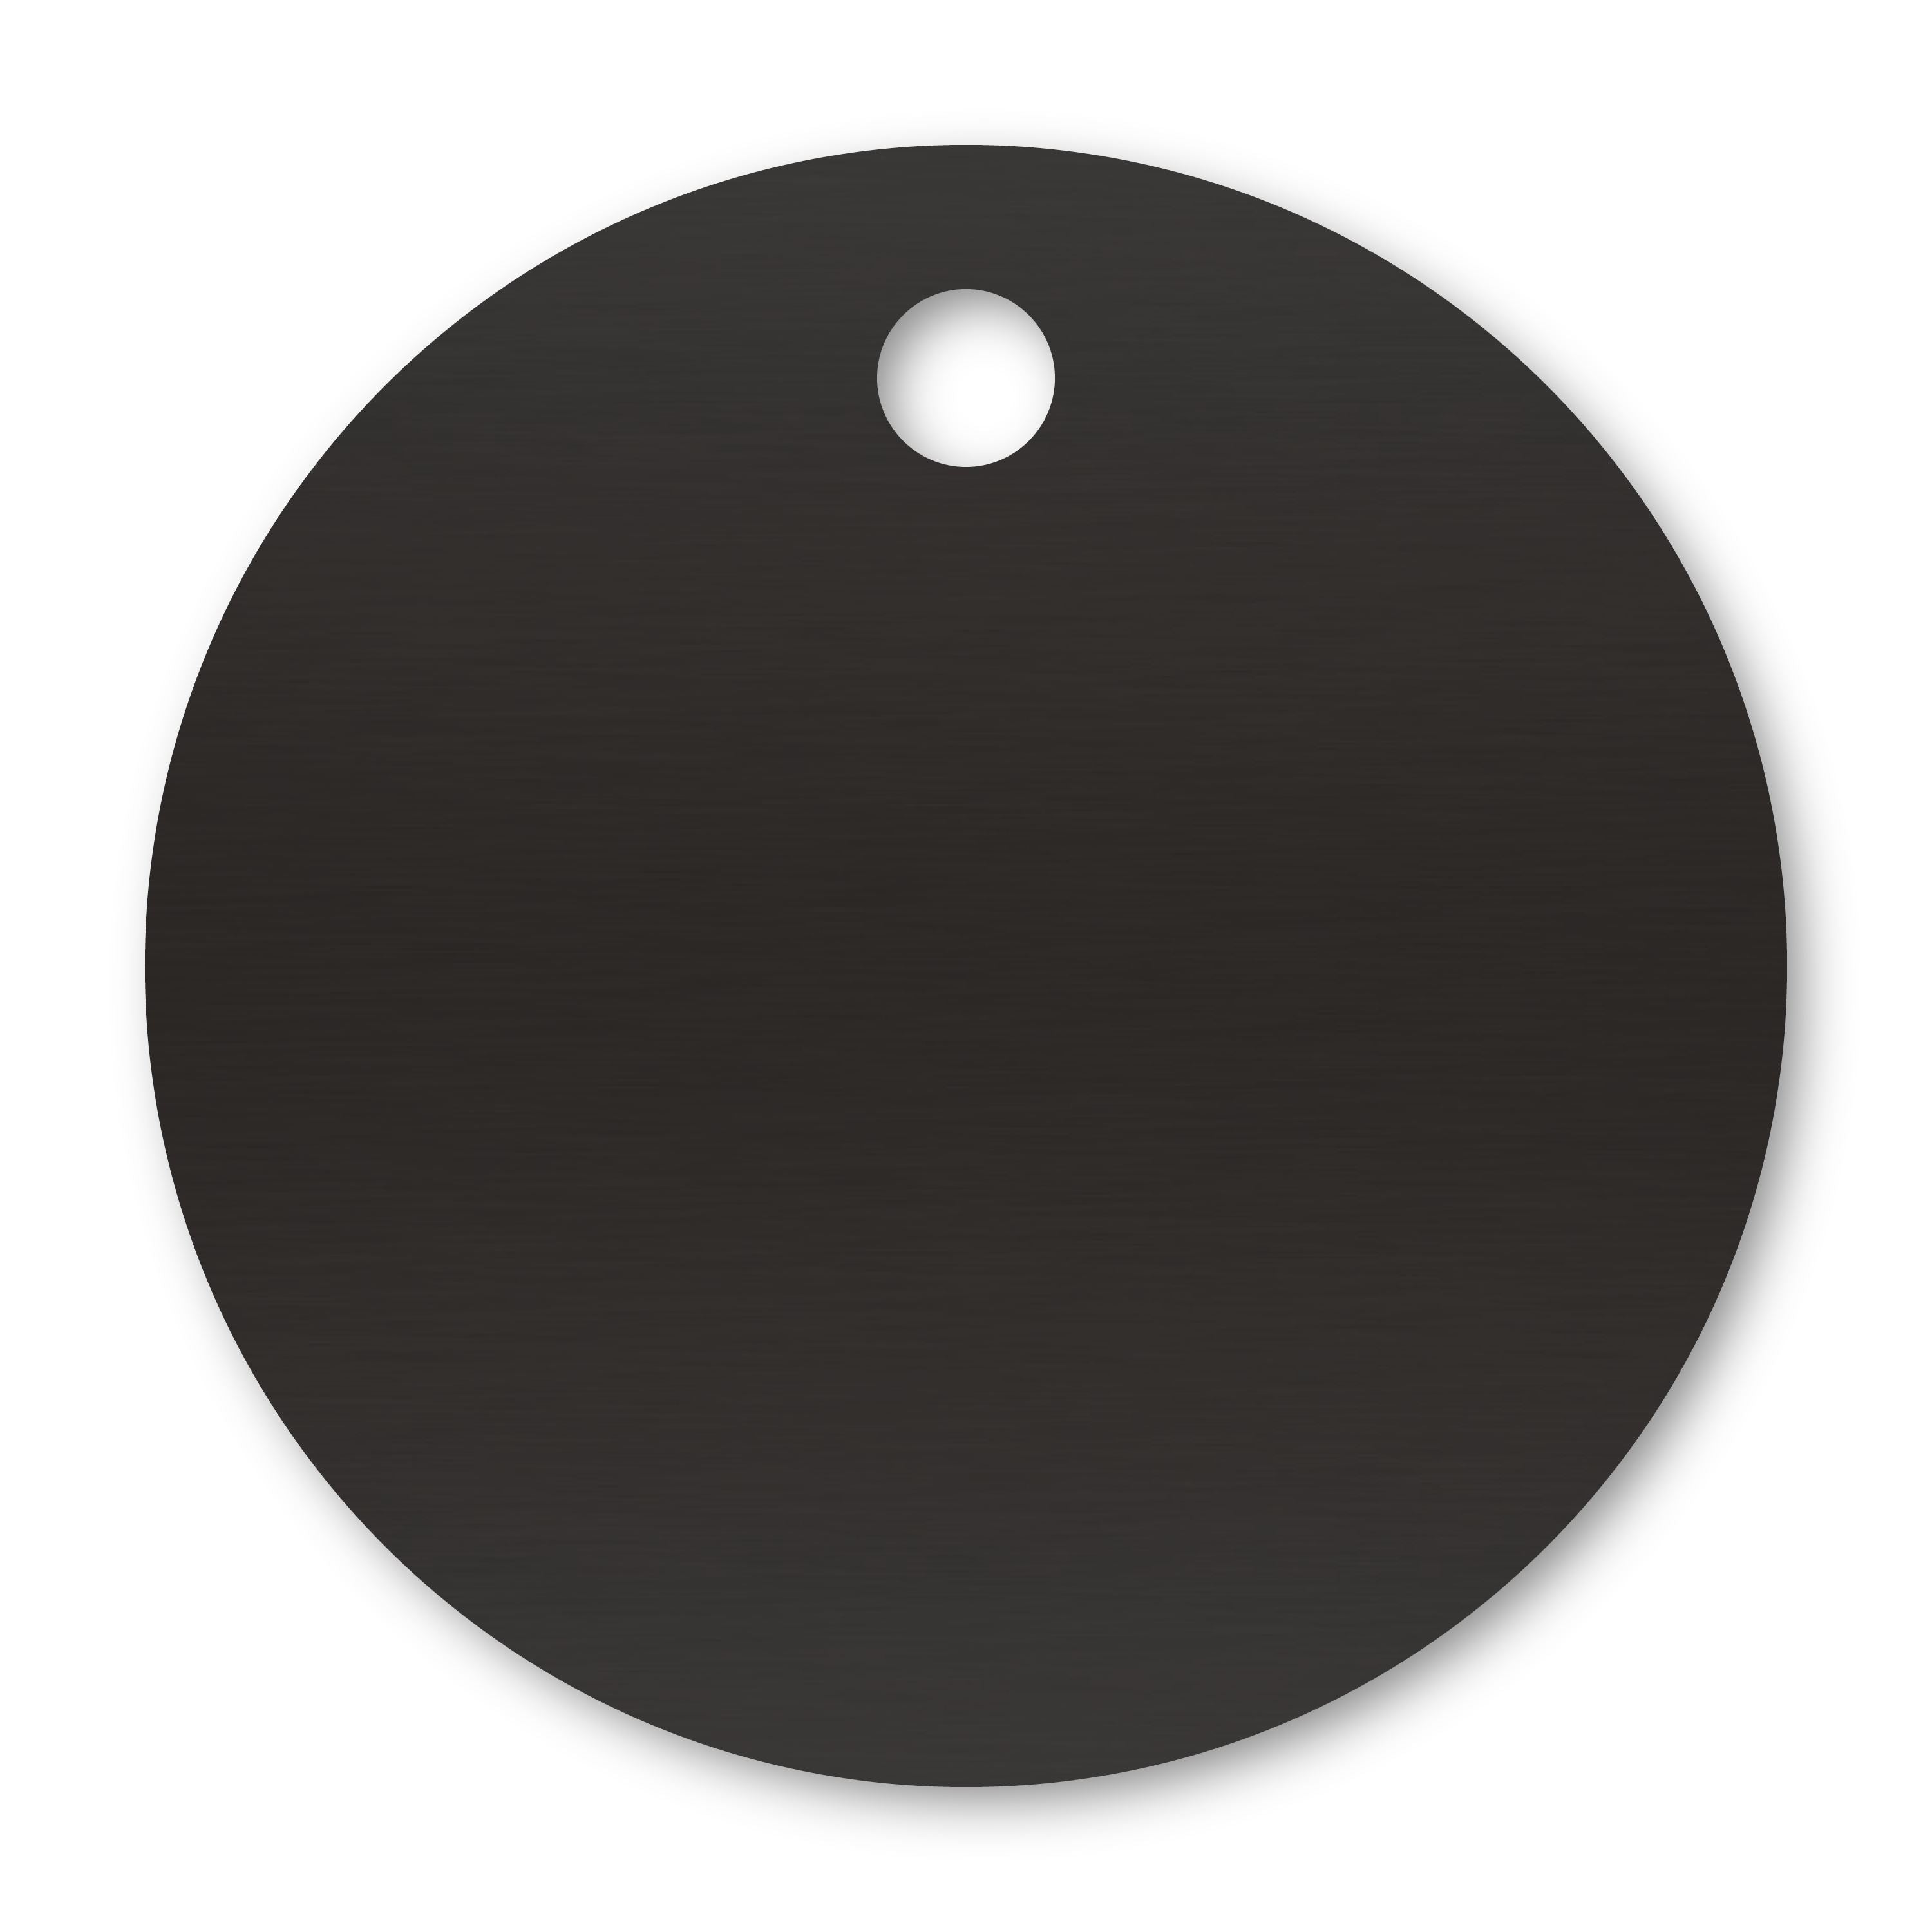 Anodized Aluminum Round Tags, 1" with 1/8" Hole, Laser Engraved Metal Tags Craftworks NW Black 